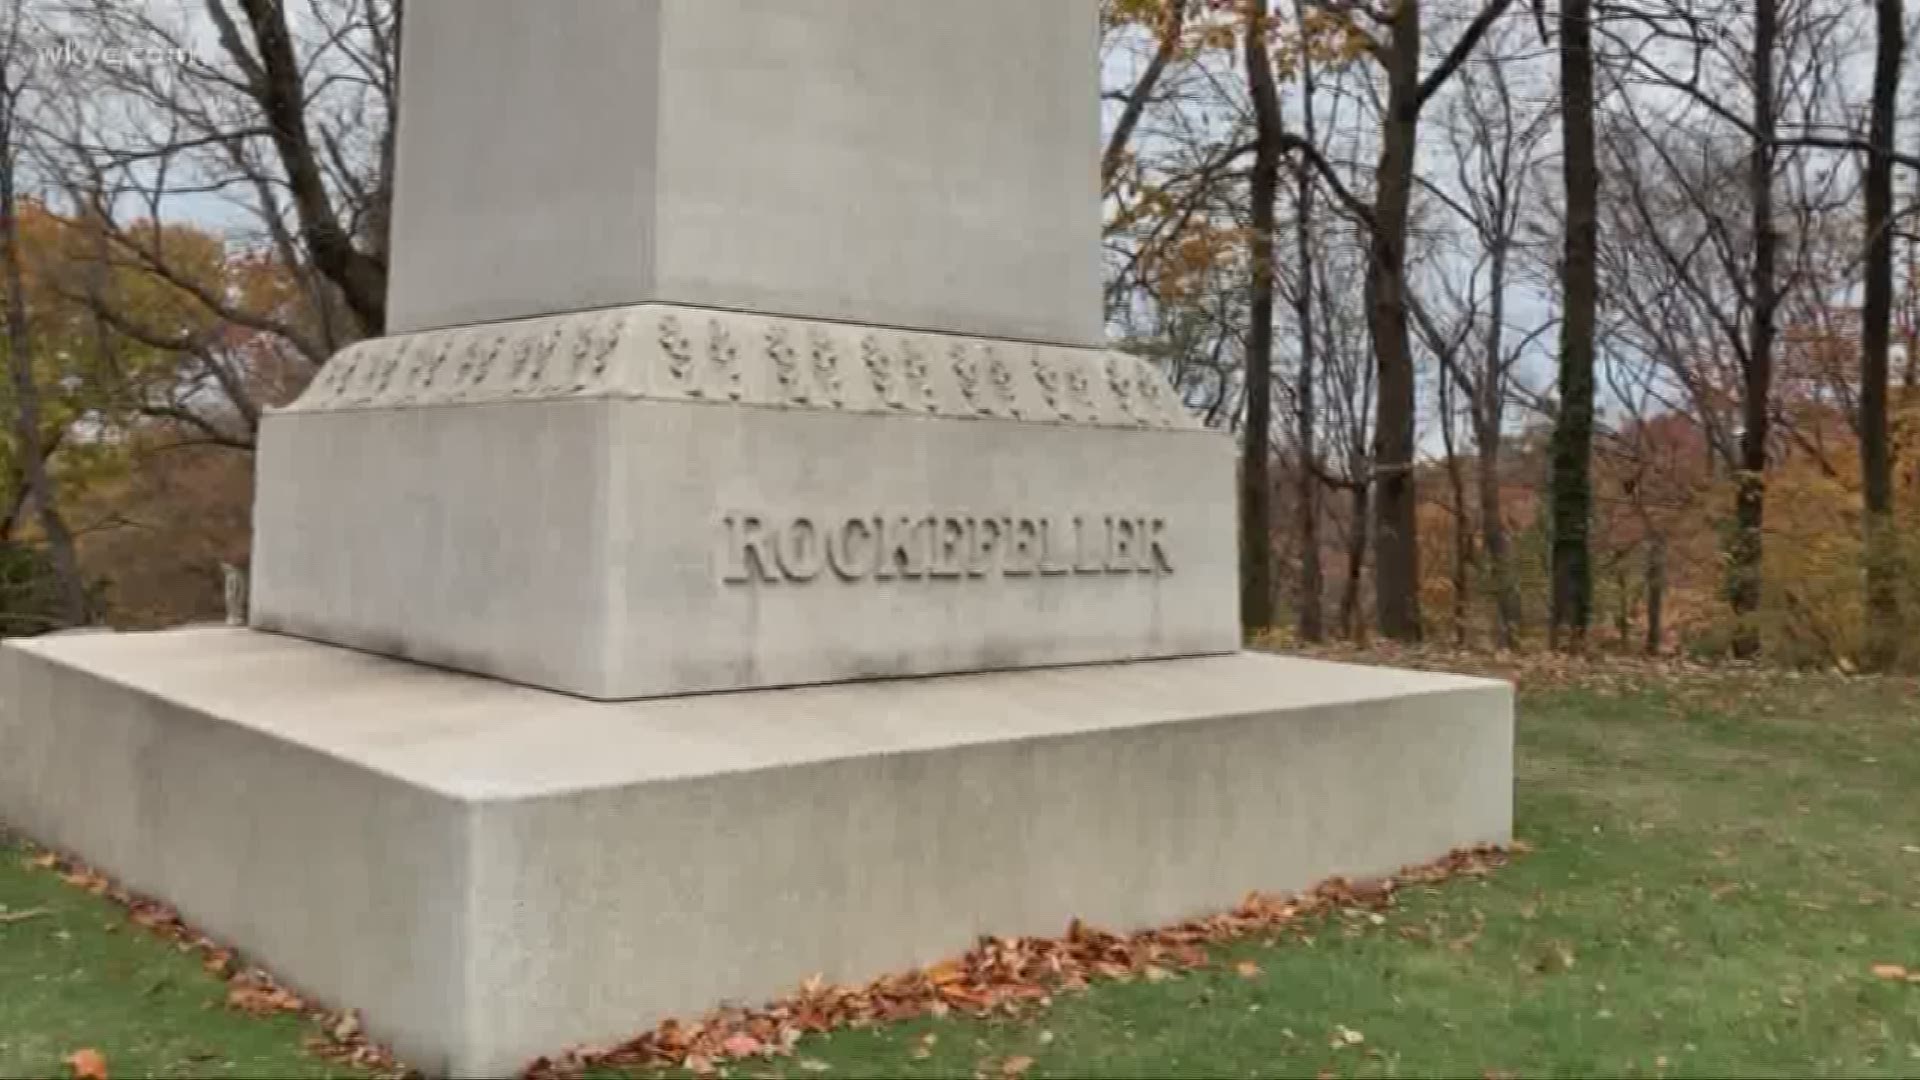 Nov. 14, 2018: We take an inside look at the coolest places in University Circle with WKYC's Austin Love.